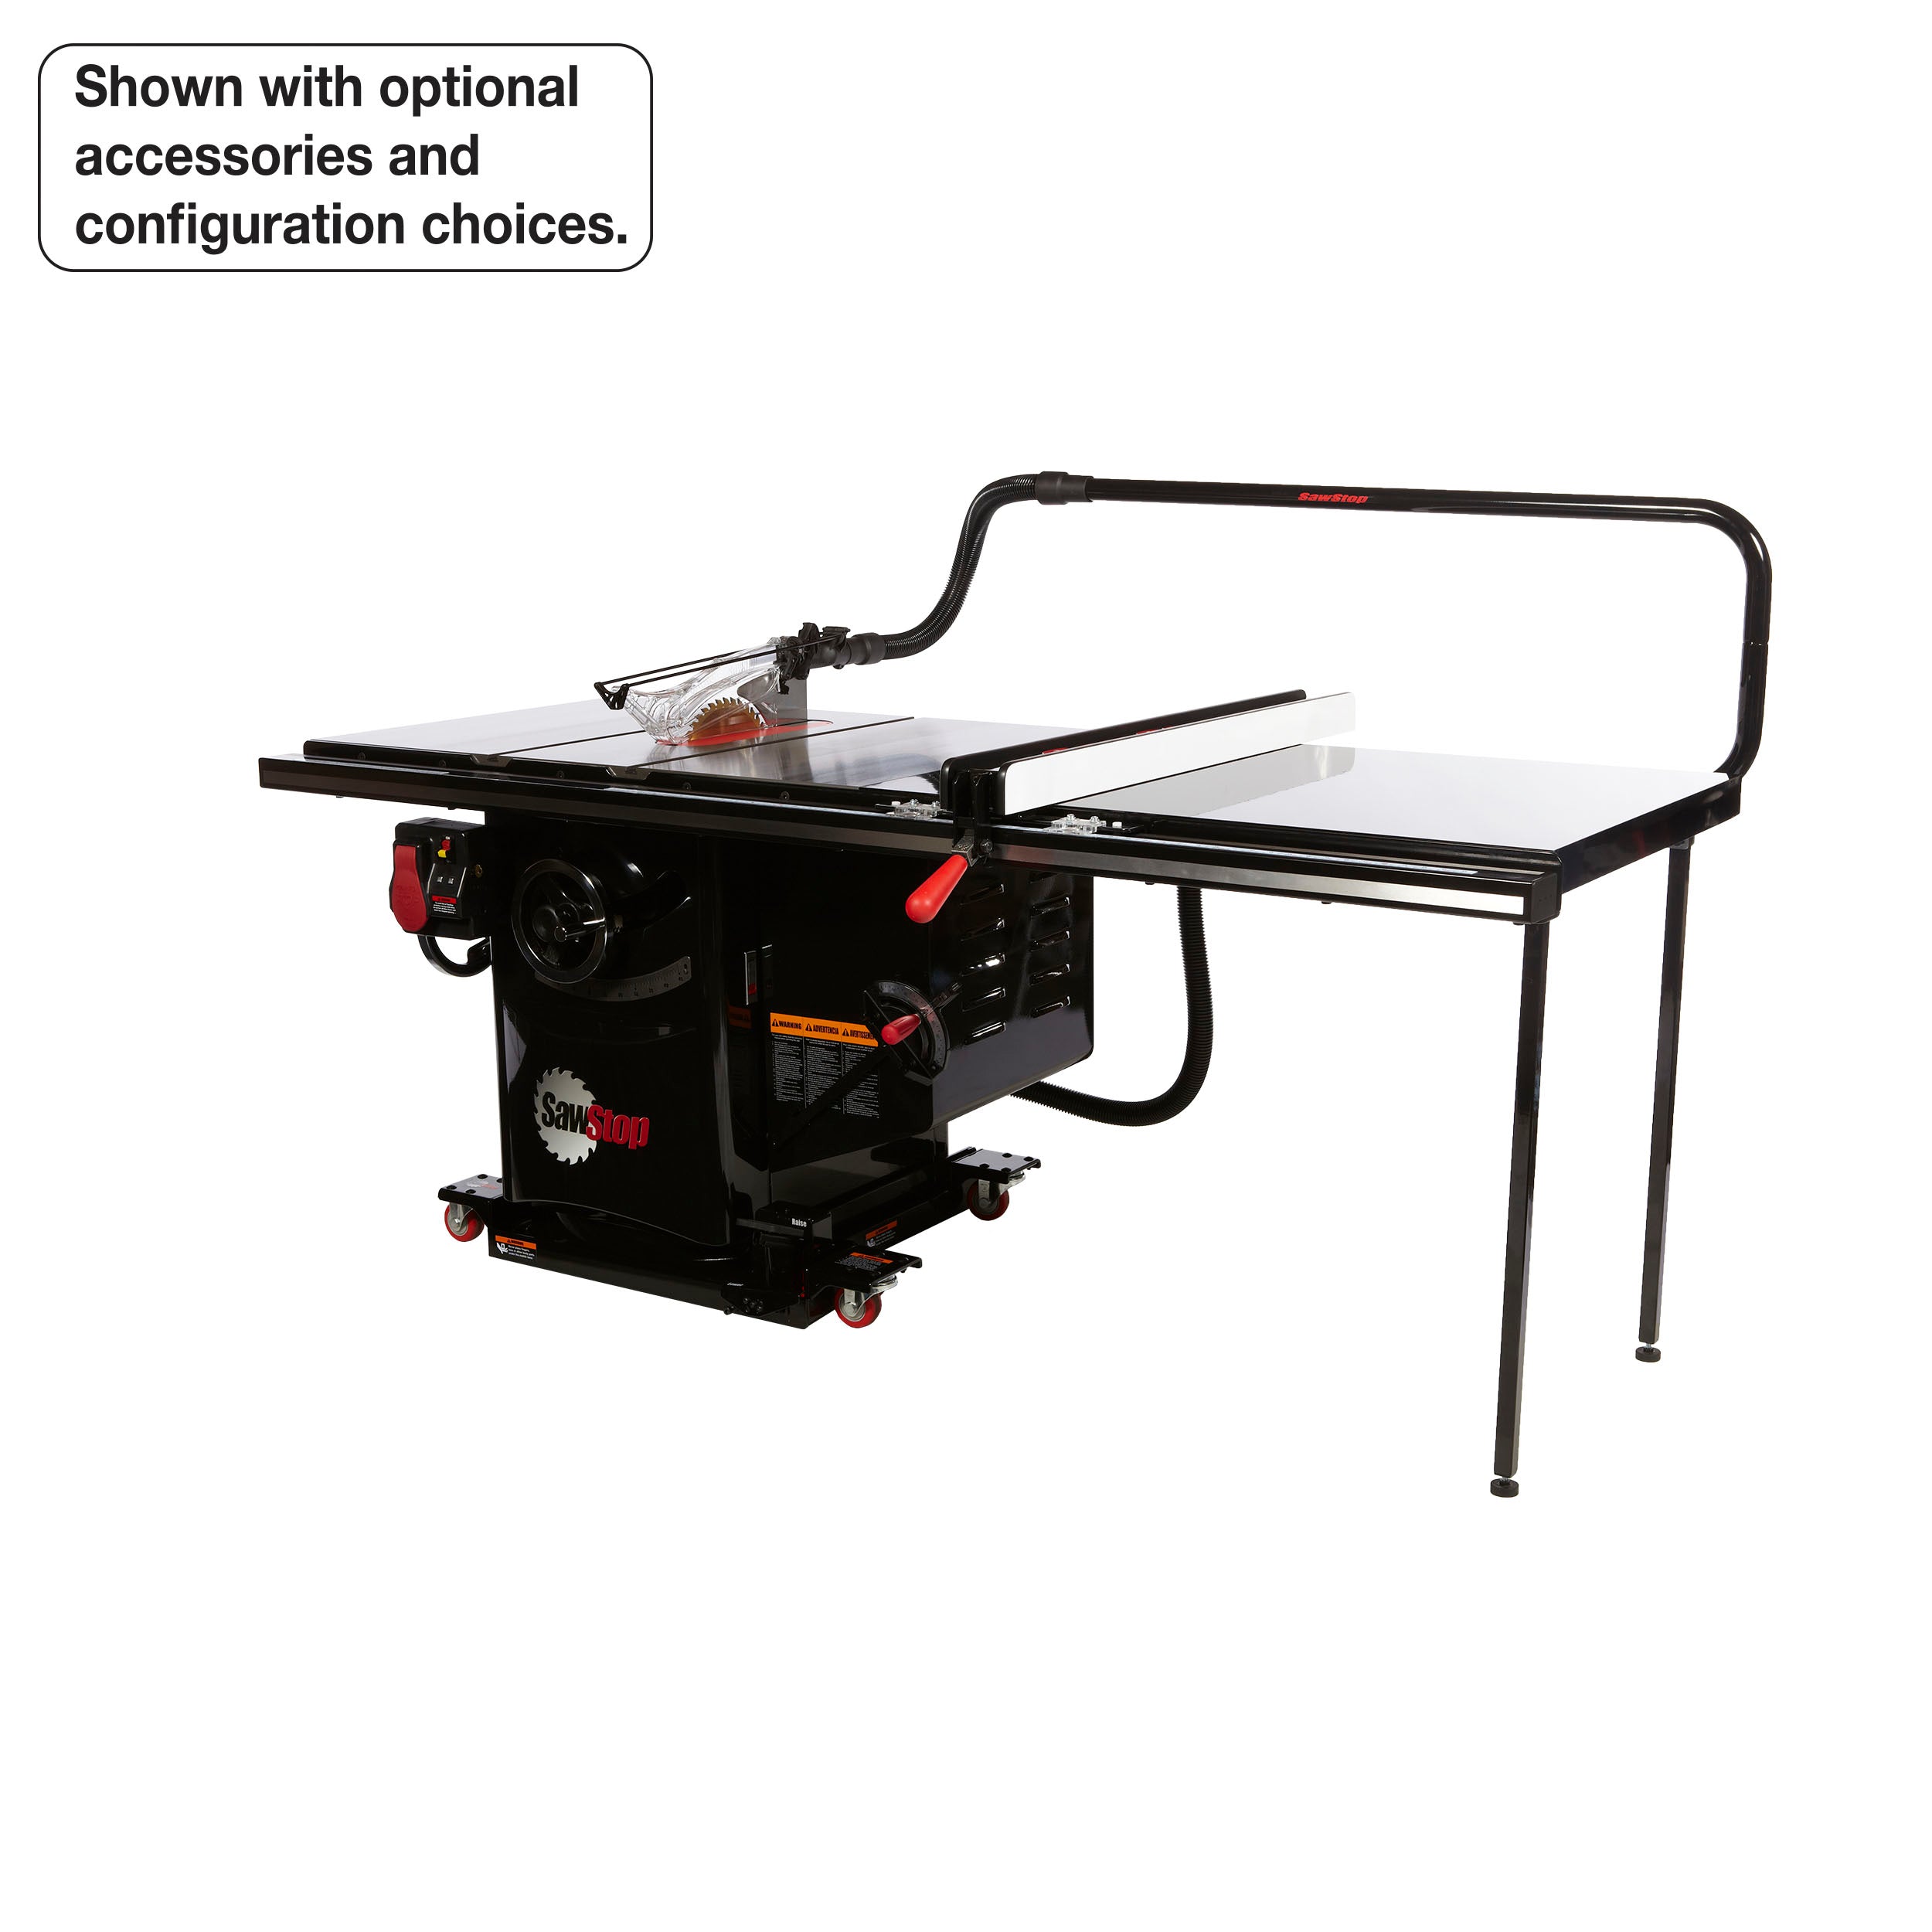 SawStop 3HP, 1ph, 230v Industrial Cabinet Saw w/ 36